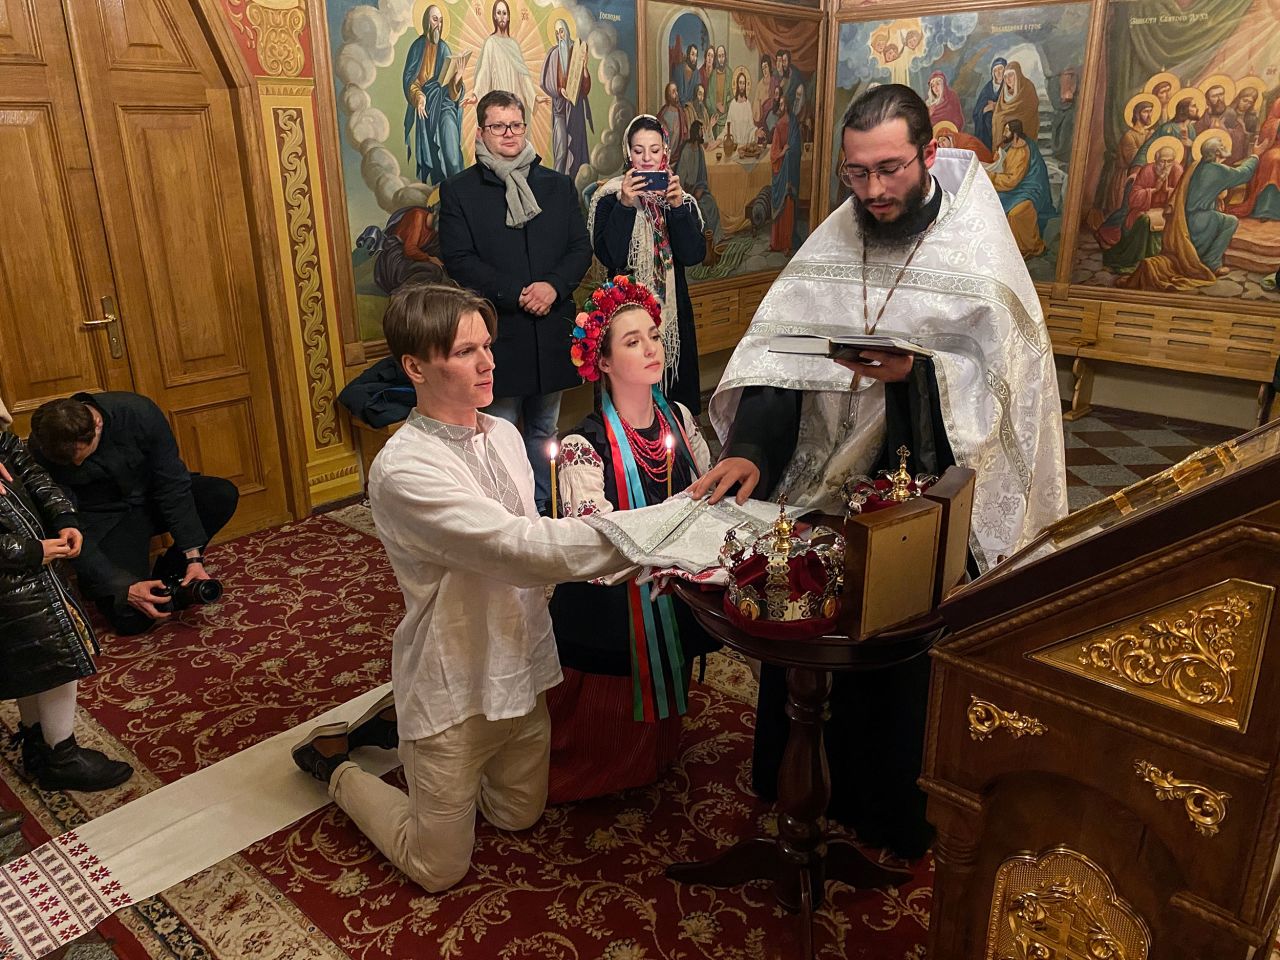 Sviatoslav Fursin, left, and Yaryna Arieva kneel during <a href="https://www.cnn.com/2022/02/24/europe/ukraine-wedding-invasion-thursday-intl/index.html" target="_blank">their wedding ceremony</a> at St. Michael's cathedral in Kyiv, Ukraine, on Thursday, February 24. They had planned on getting married in May, but rushed to tie the knot due to the attacks by Russian forces. "We maybe can die, and we just wanted to be together before all of that," Arieva said.